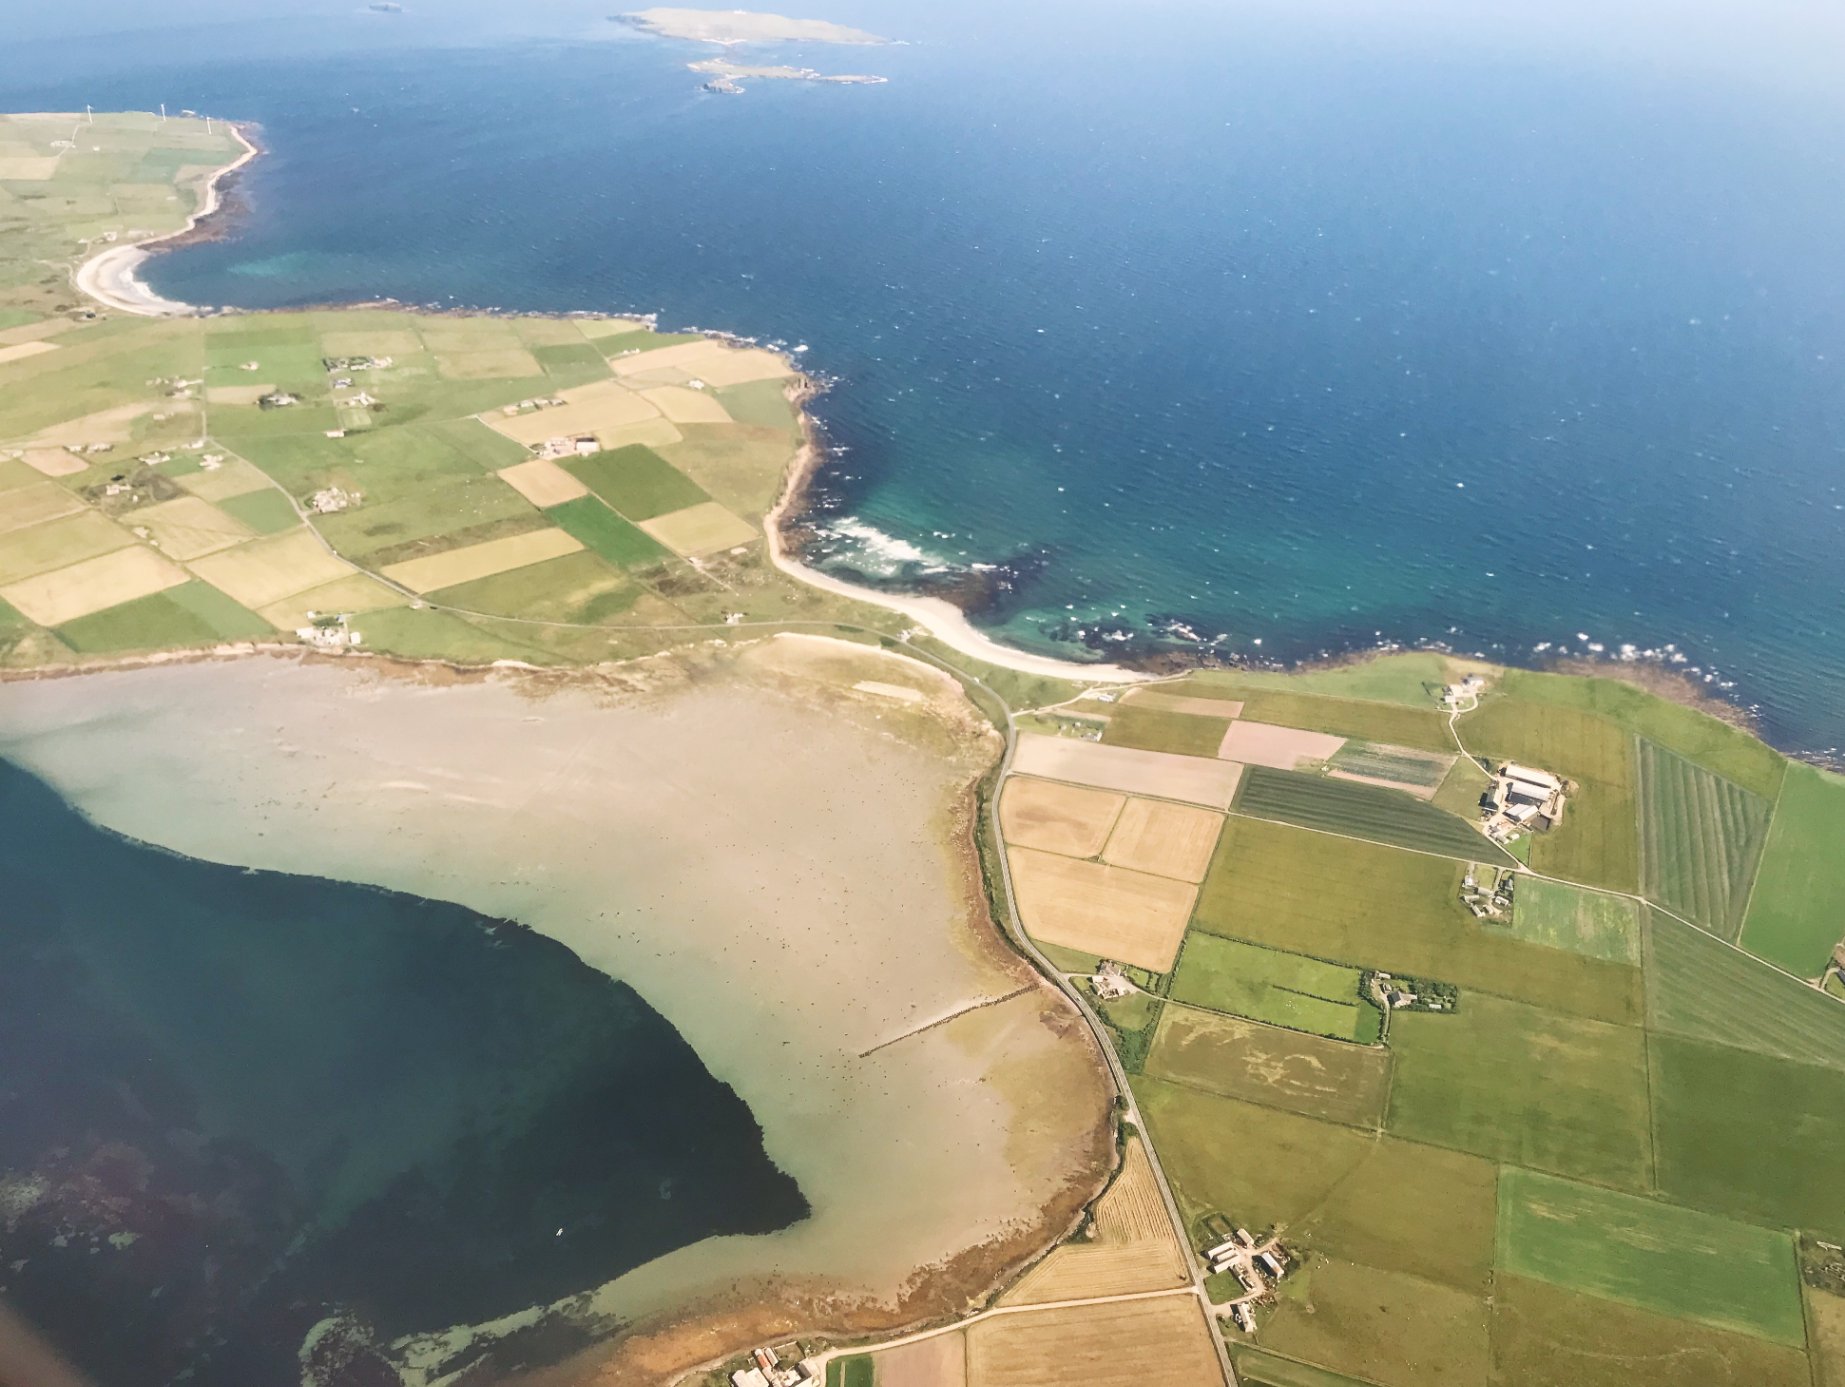 View over Dingieshowe, Orkney - image by Louise Bichan